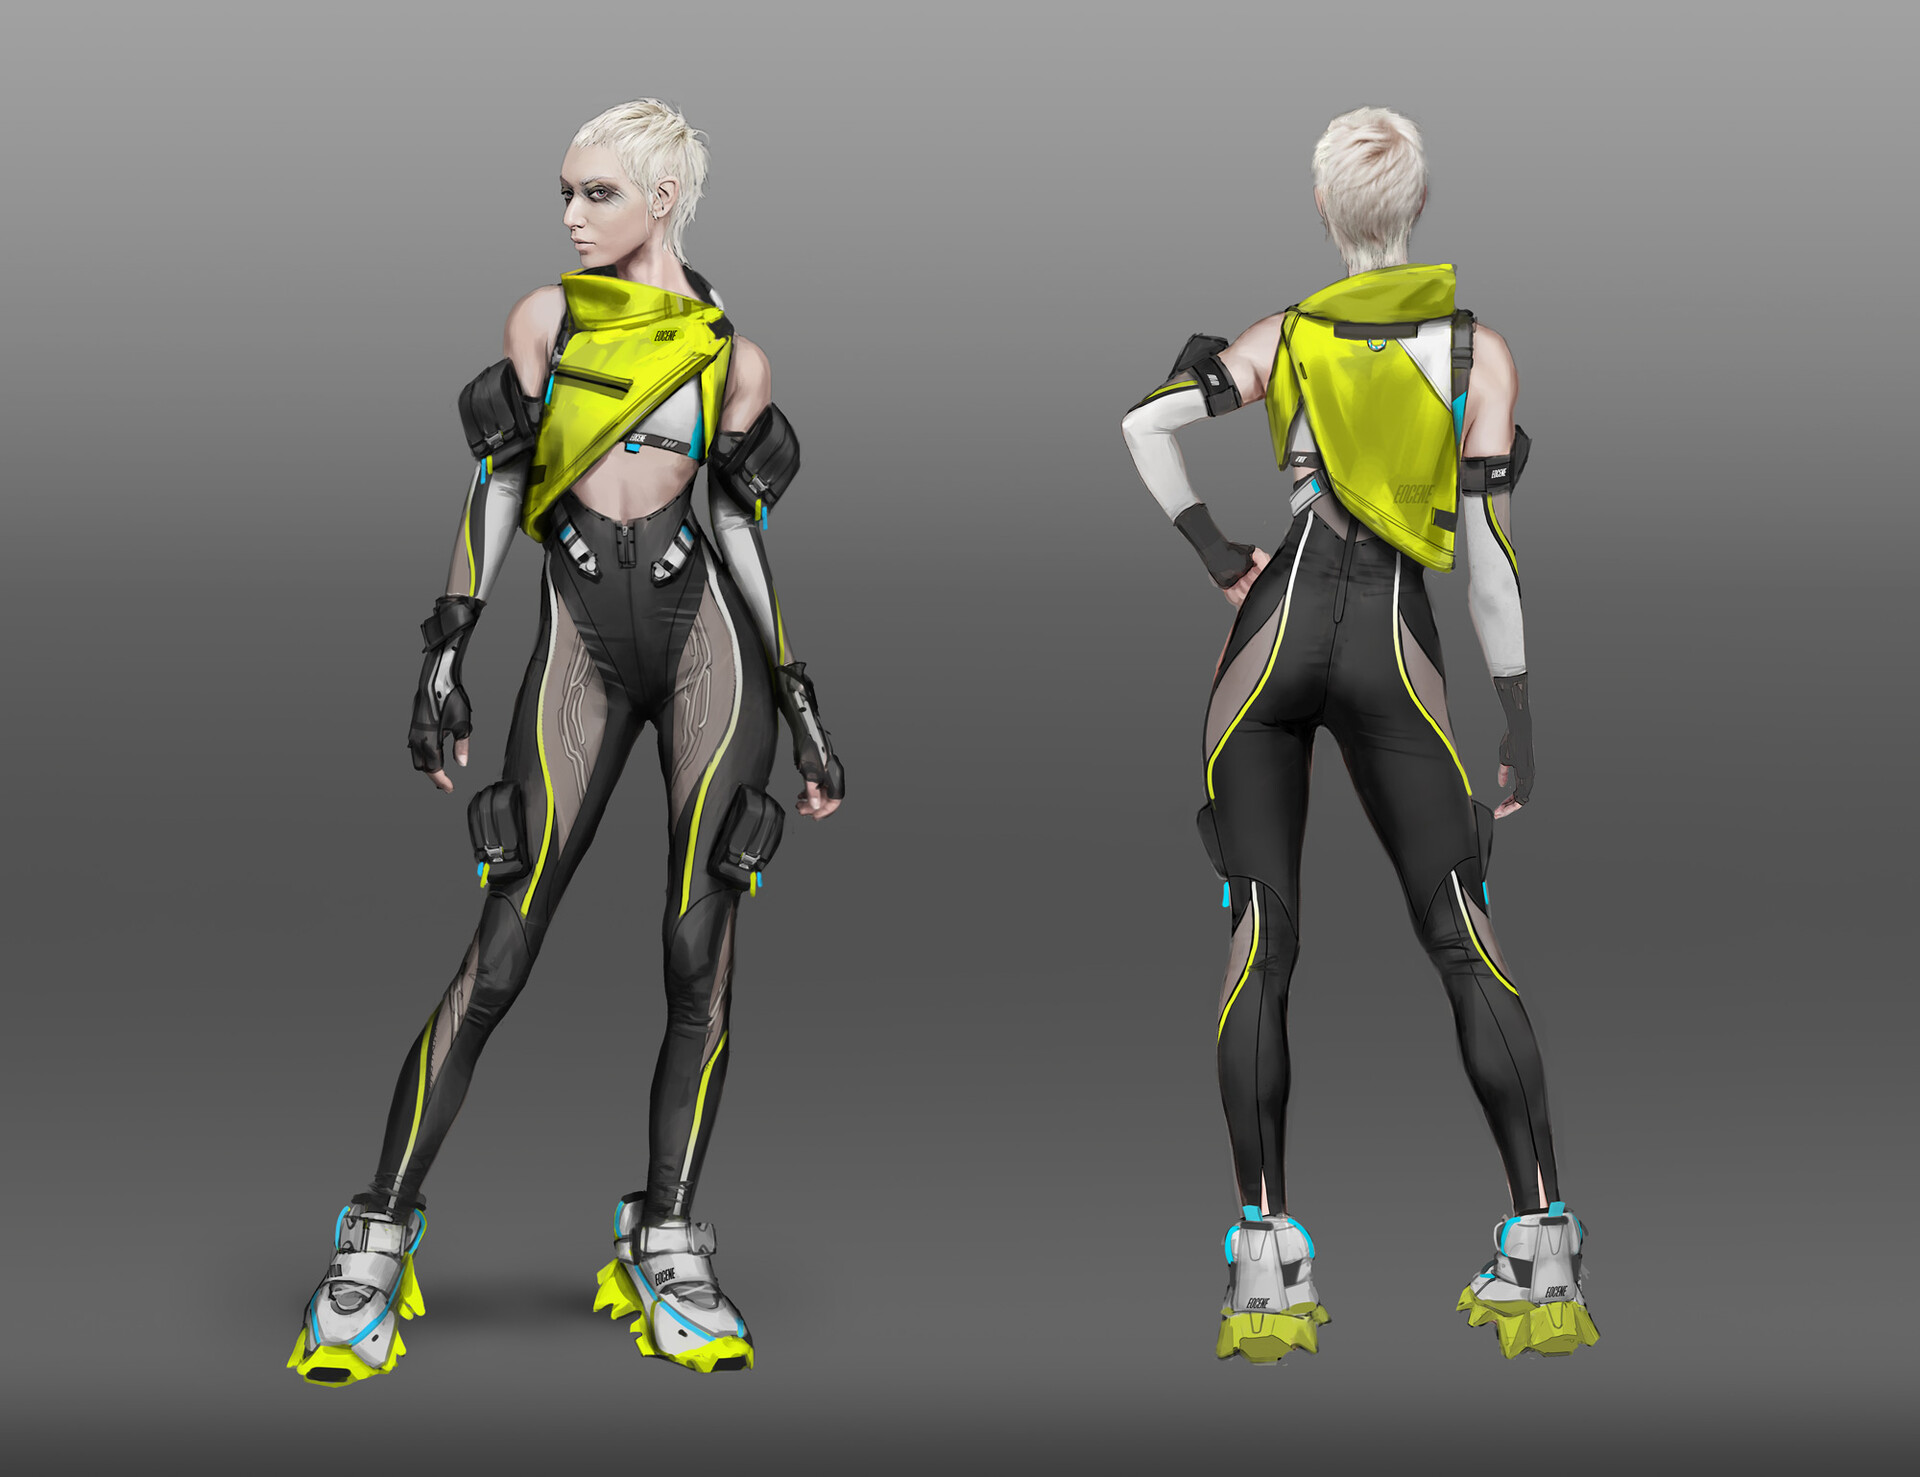 davekeen: “More character concept work for Rogue Company game